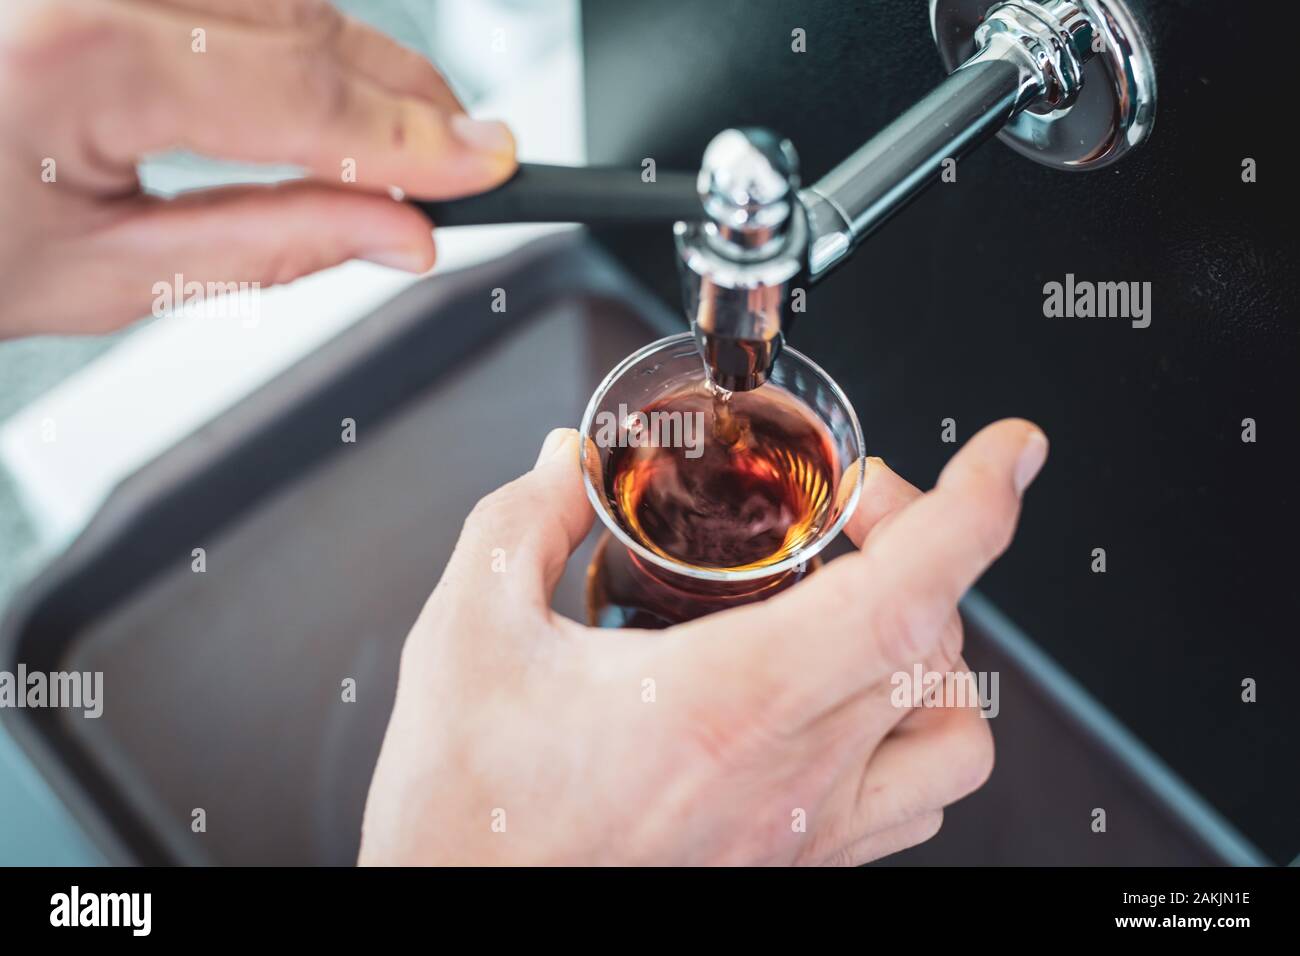 Caucasian man pouring traditional Turkish tea from teapot Stock Photo